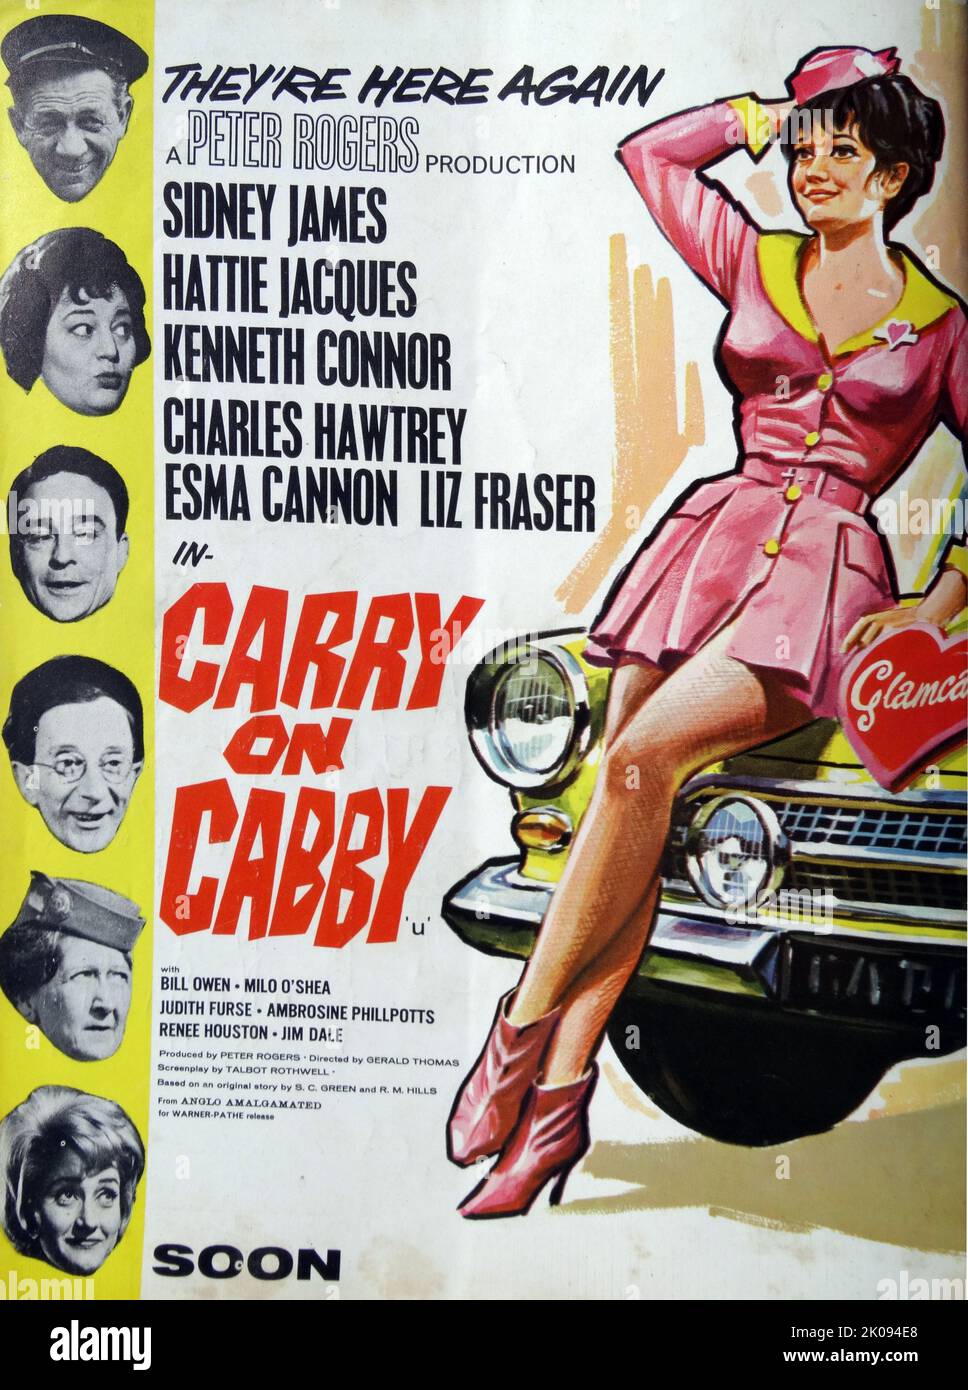 Plakat Werbung 1963 Film Carry On Cabby, mit Sid James, Hattie Jacques, Kenneth Connor und Charles Hawtrey. Stockfoto